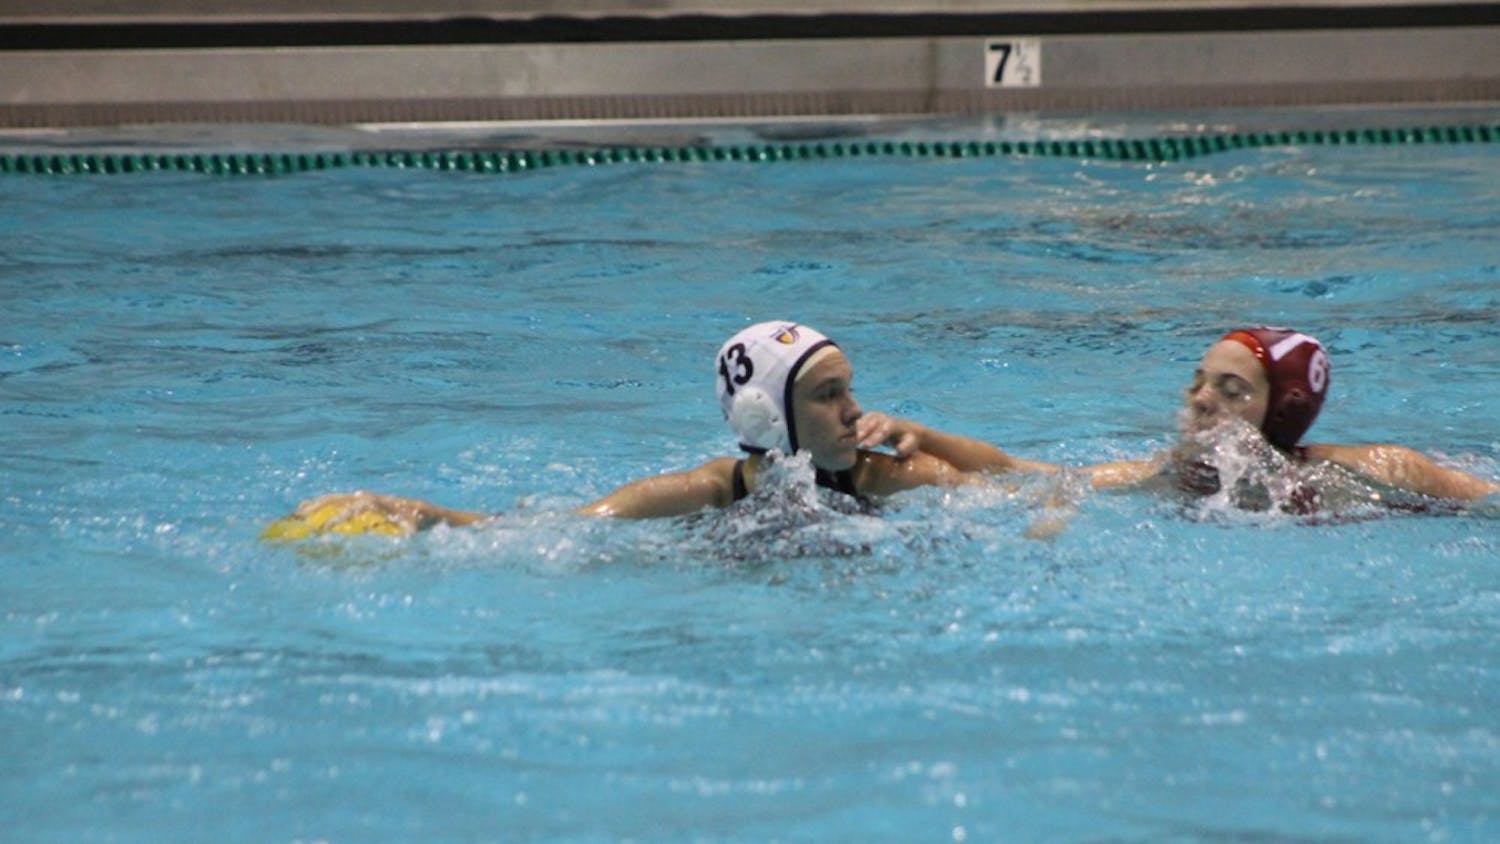 	Jessica Castellano of California Baptist University defends the ball from IU junior Jennifer Beadle on Saturday evening. The Hoosiers defeated the Lancers 13-6 in the Counsilman-Billingsley Aquatics Center.